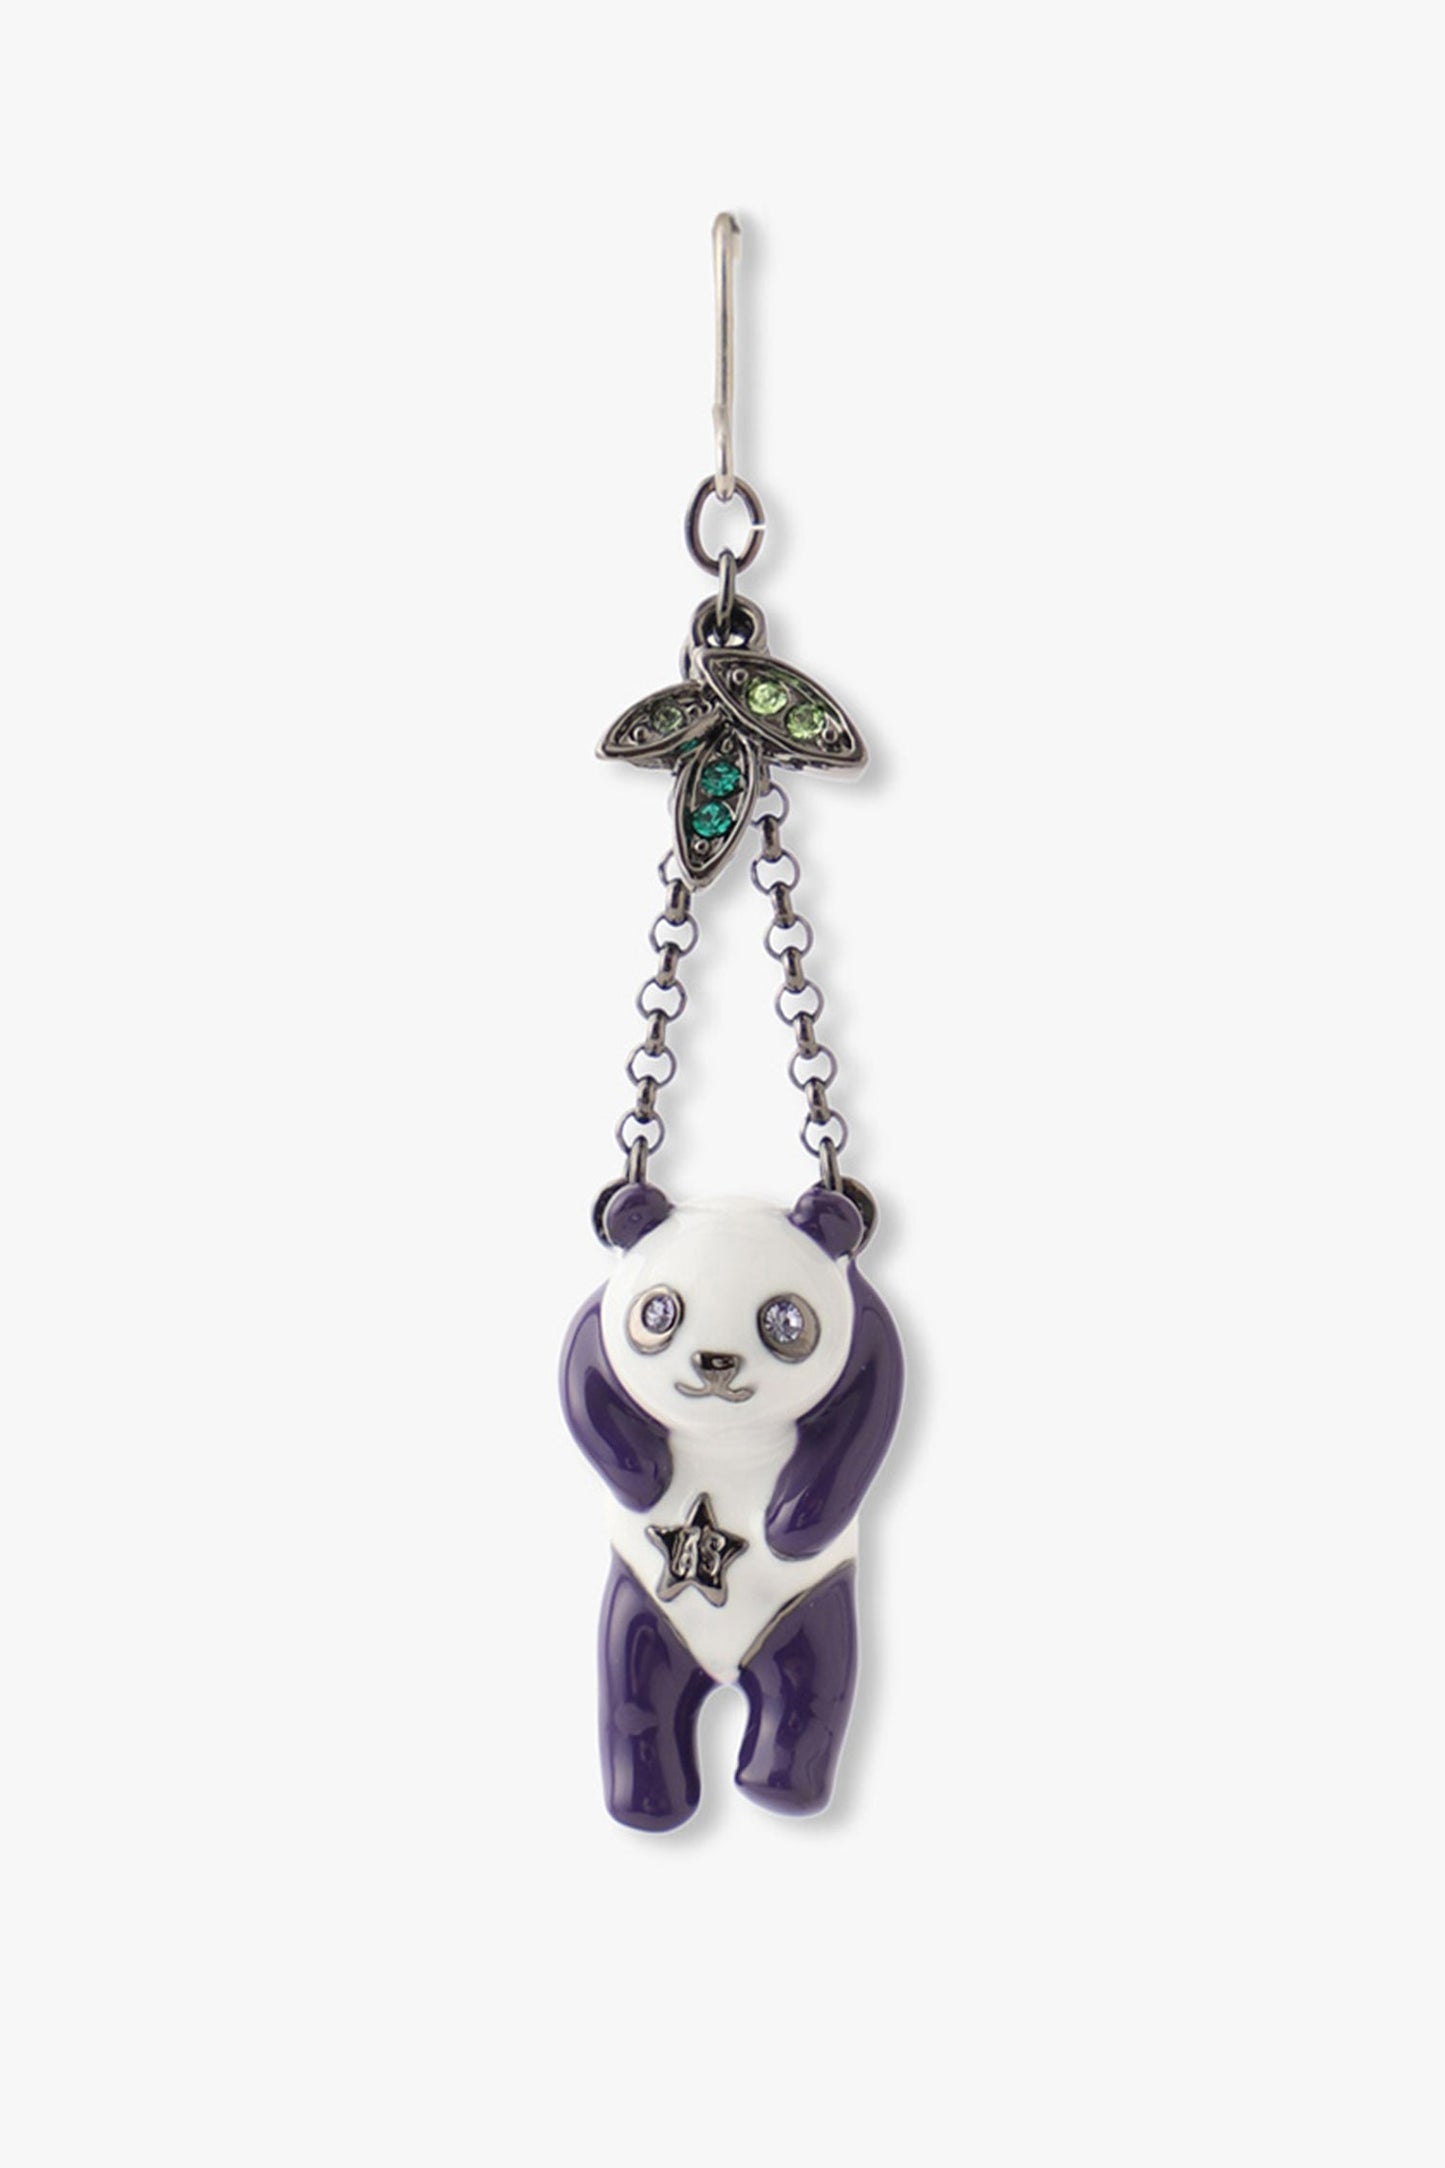 Panda white on head/body, purple arms legs and ears, embellished eyes gems, star with AS on body